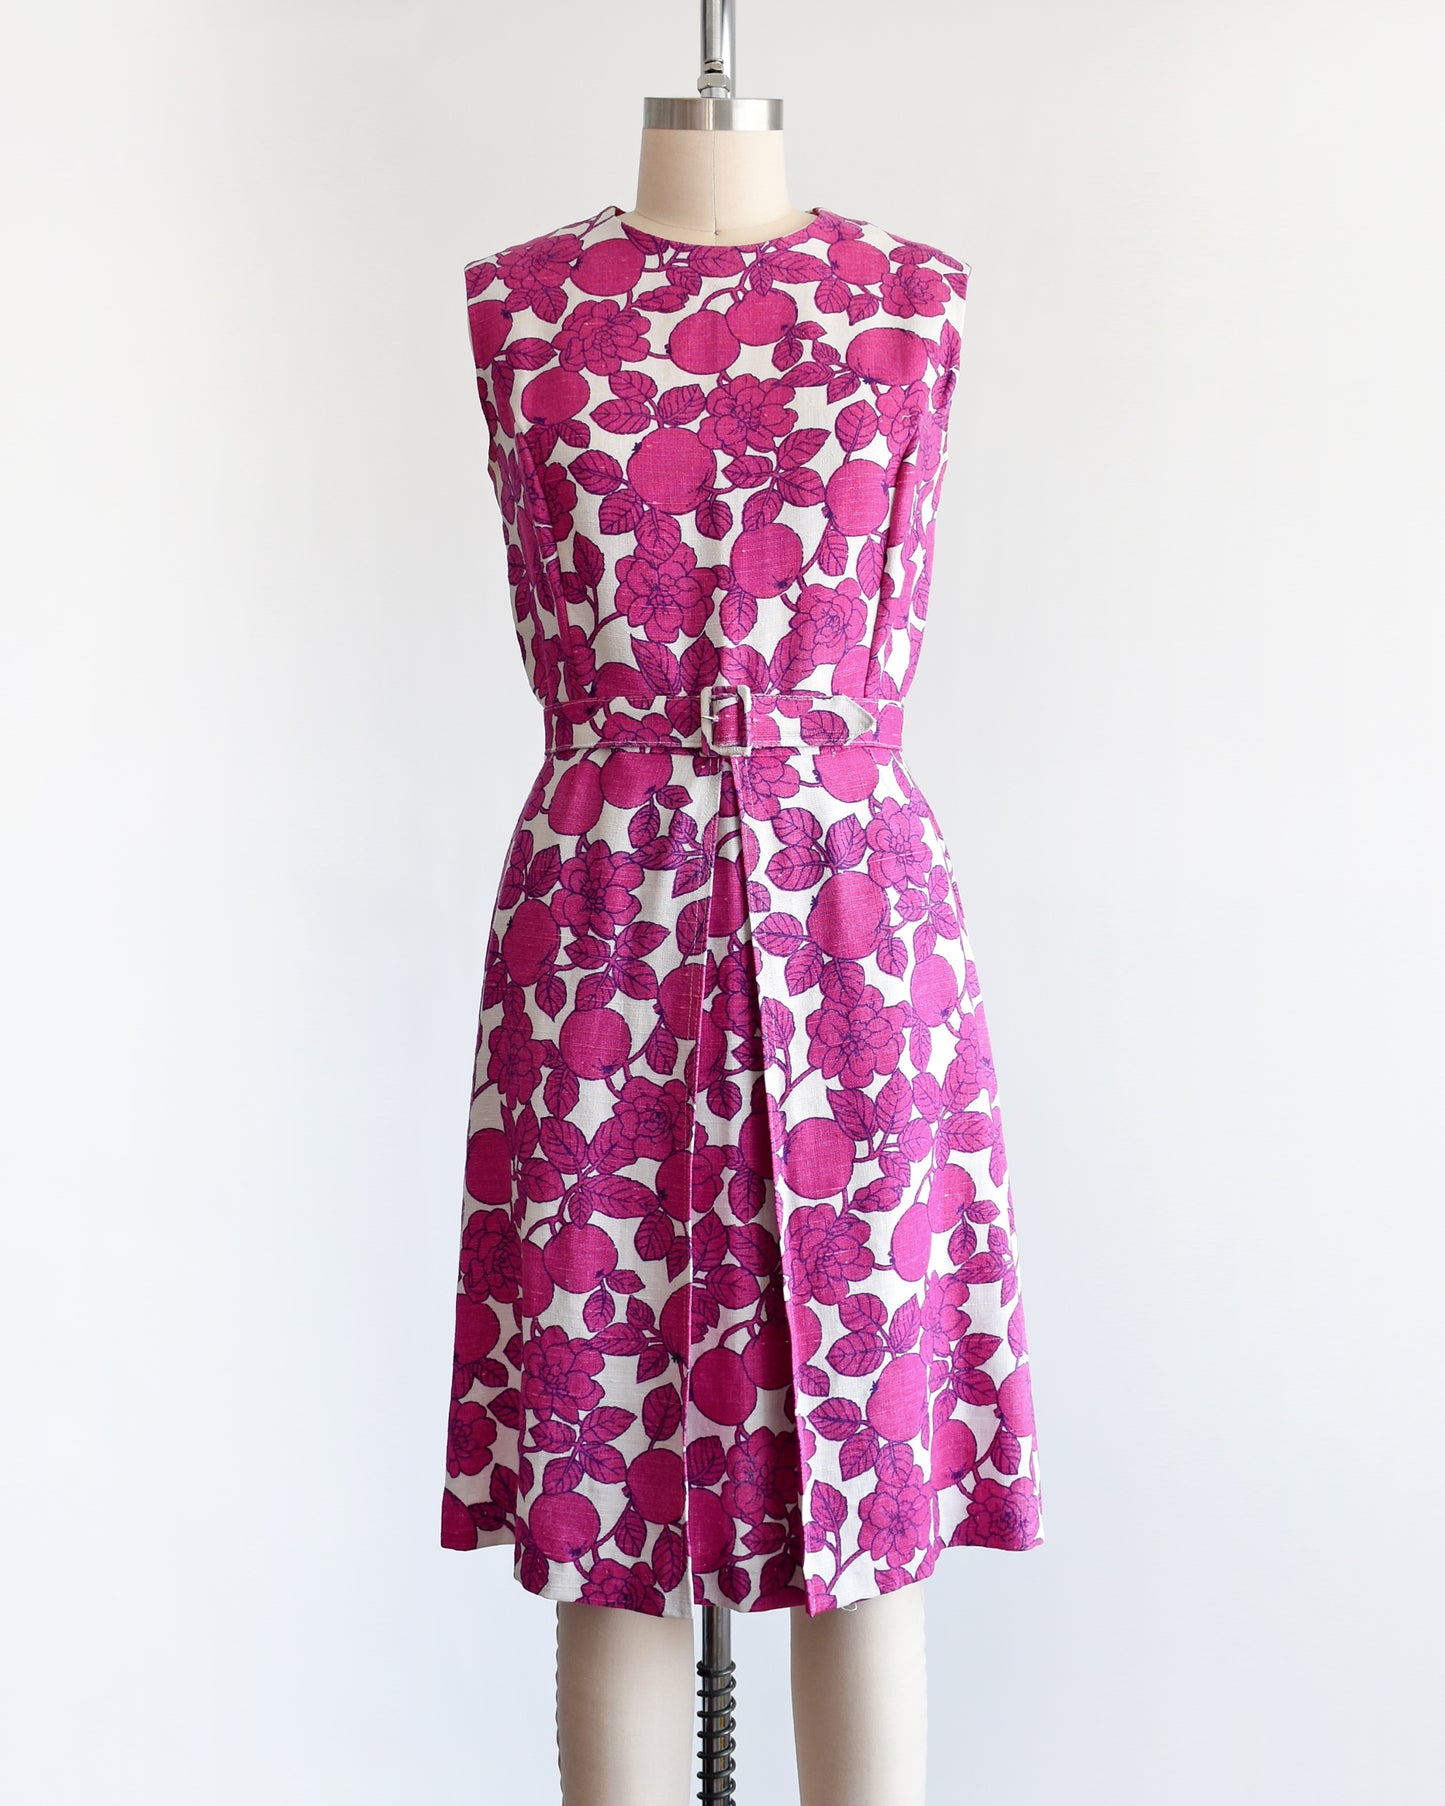 A vintage 1960s magenta and white floral and fruit print dress